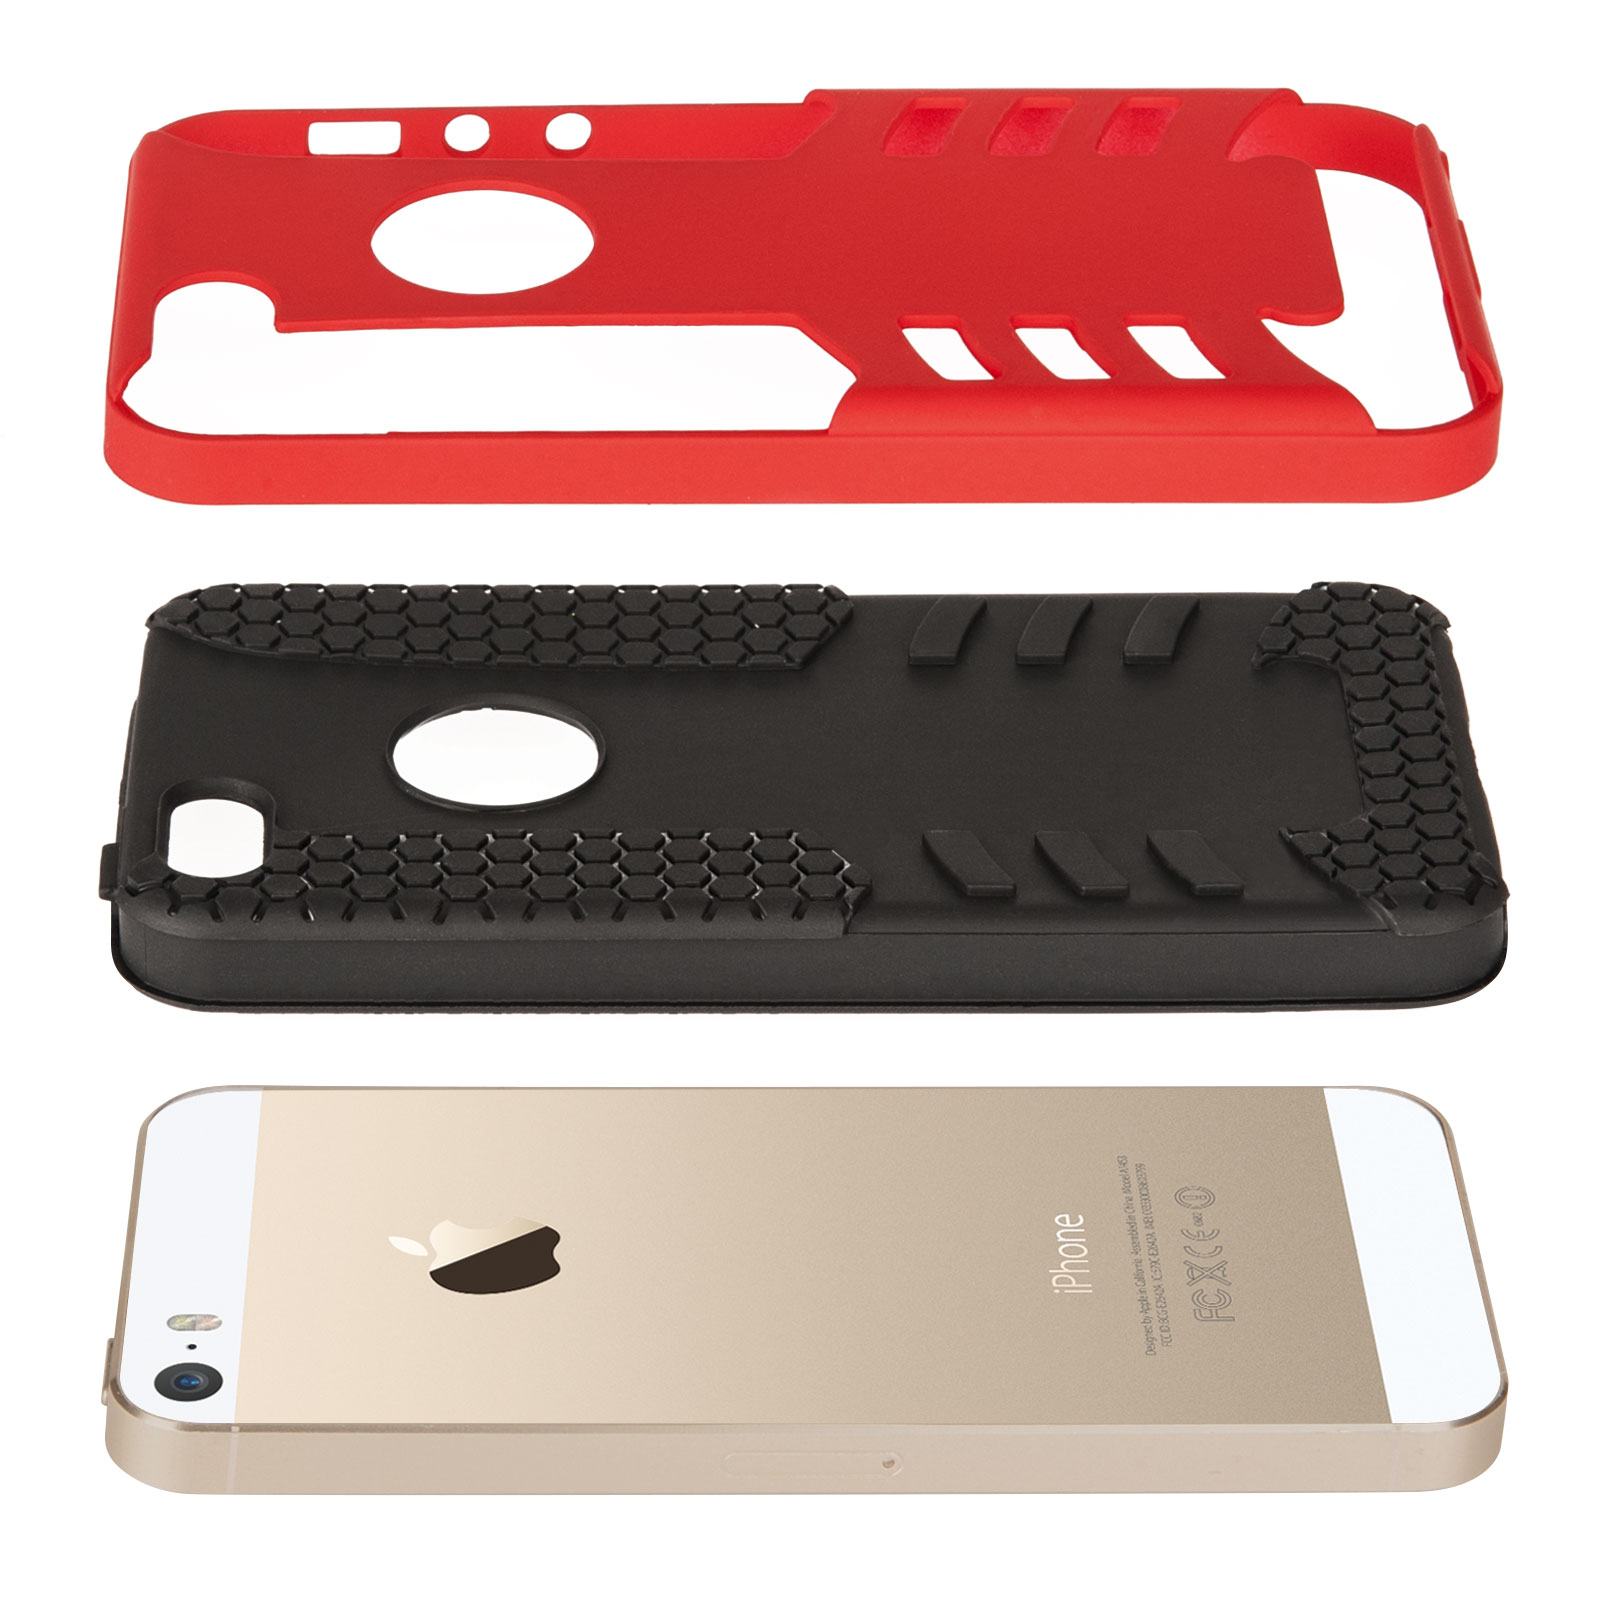 YouSave iPhone 5 / 5S / SE Border Combo Case - Red